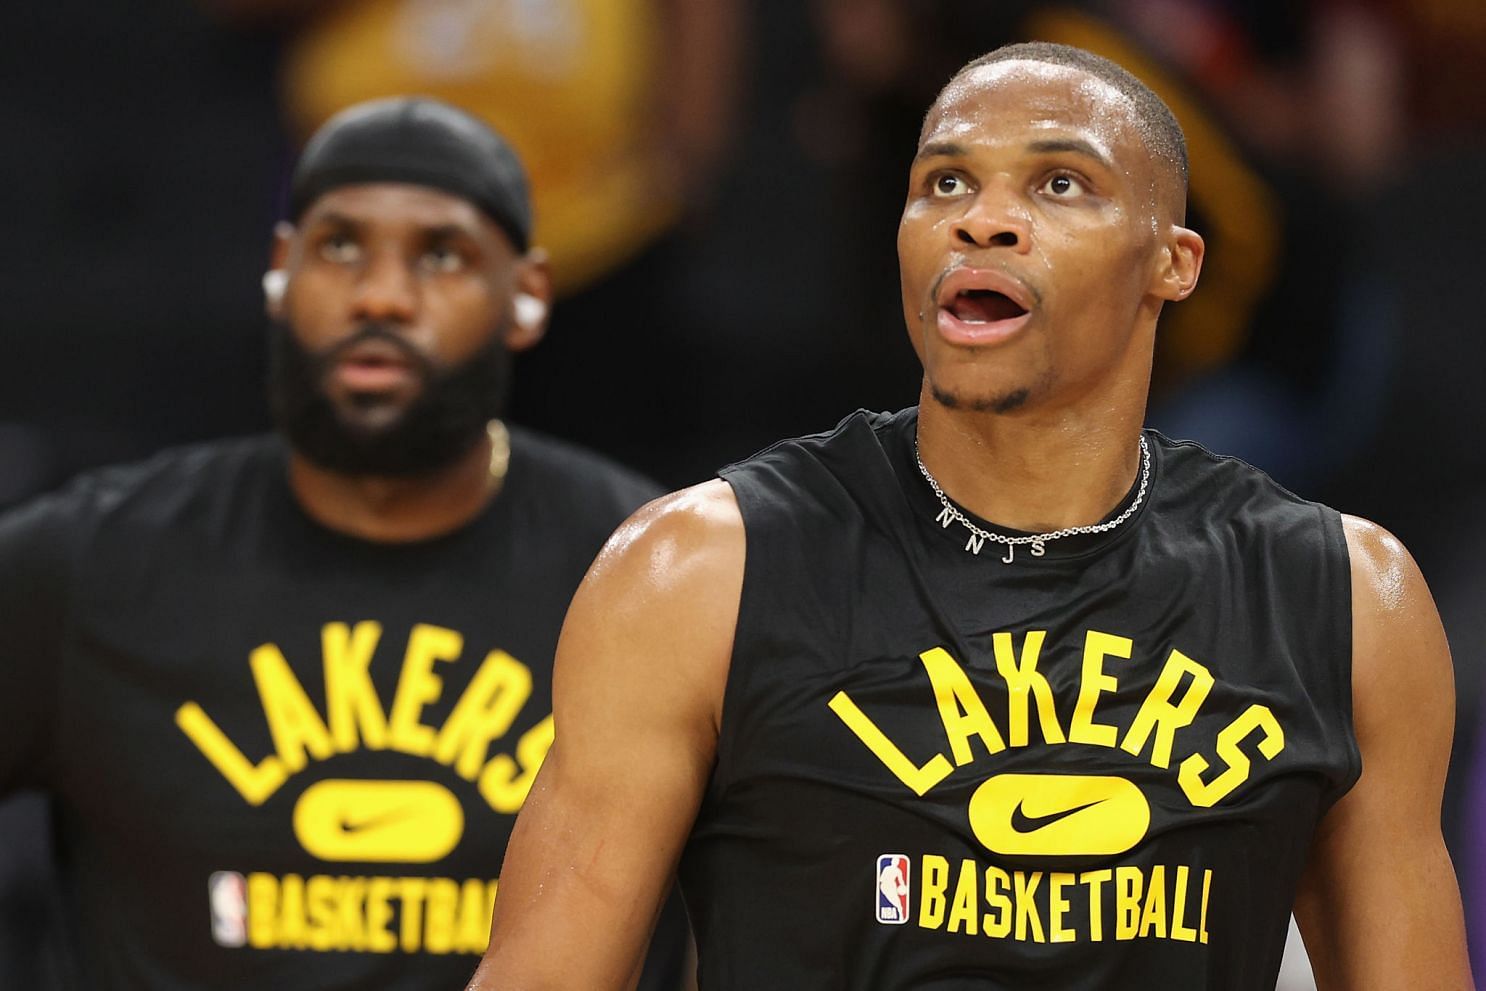 Russell Westbrook and LeBron James (off focus) at LA Lakers practice [Source: Los Angeles Times]